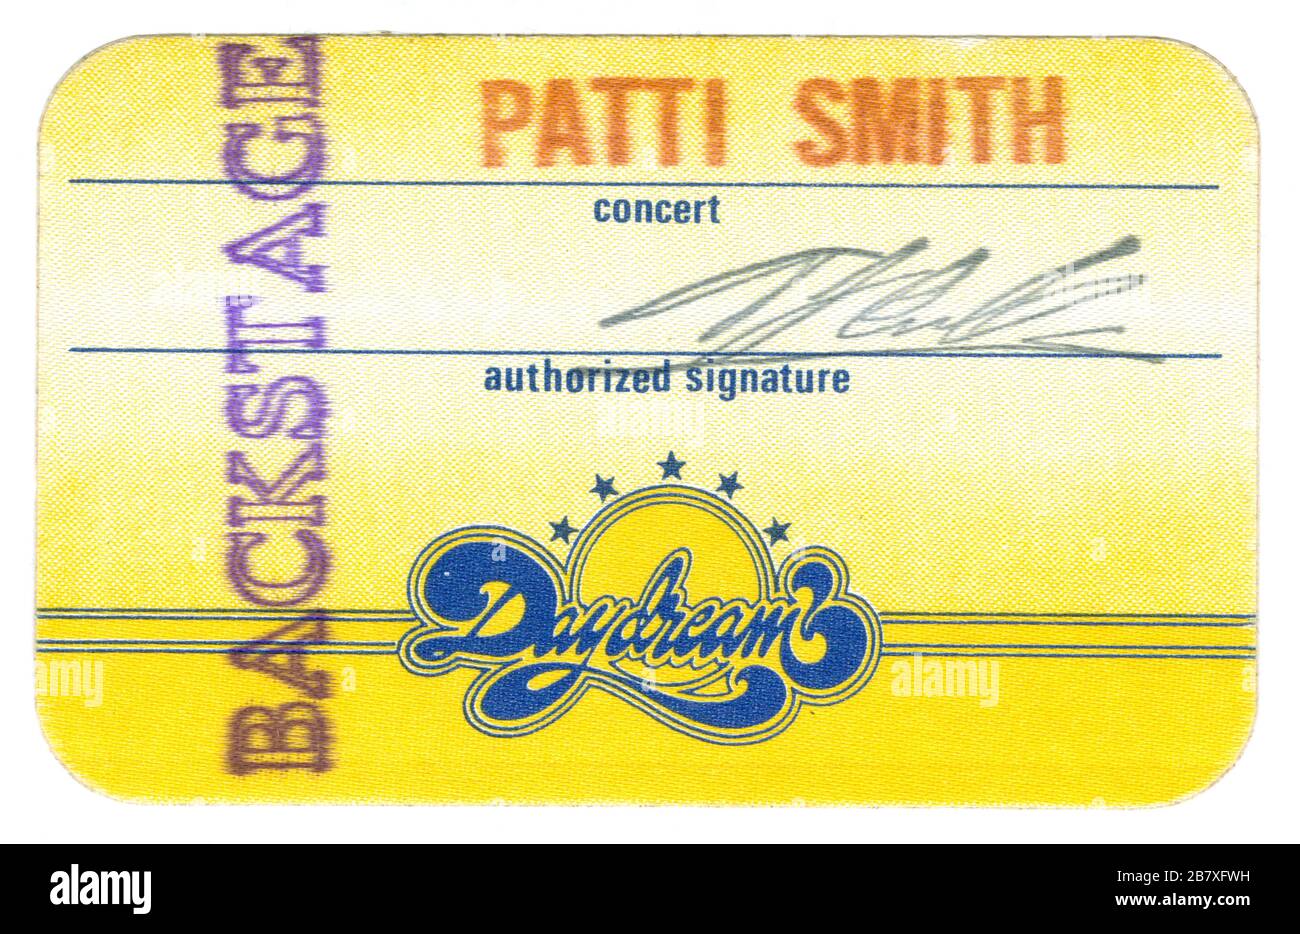 Patti Smith - official Backstage Pass from her concert at the Oriental Theatre show at Milwaukee, Wisconsin on March 6, 1976. This pass was actually the local concert promoter's pass, because Patti had no official touring pass to provide. This was quite common in the early 1970s; most bands did not print their own passes.  To see my other Music-related vintage images, Search:  Prestor vintage music Stock Photo